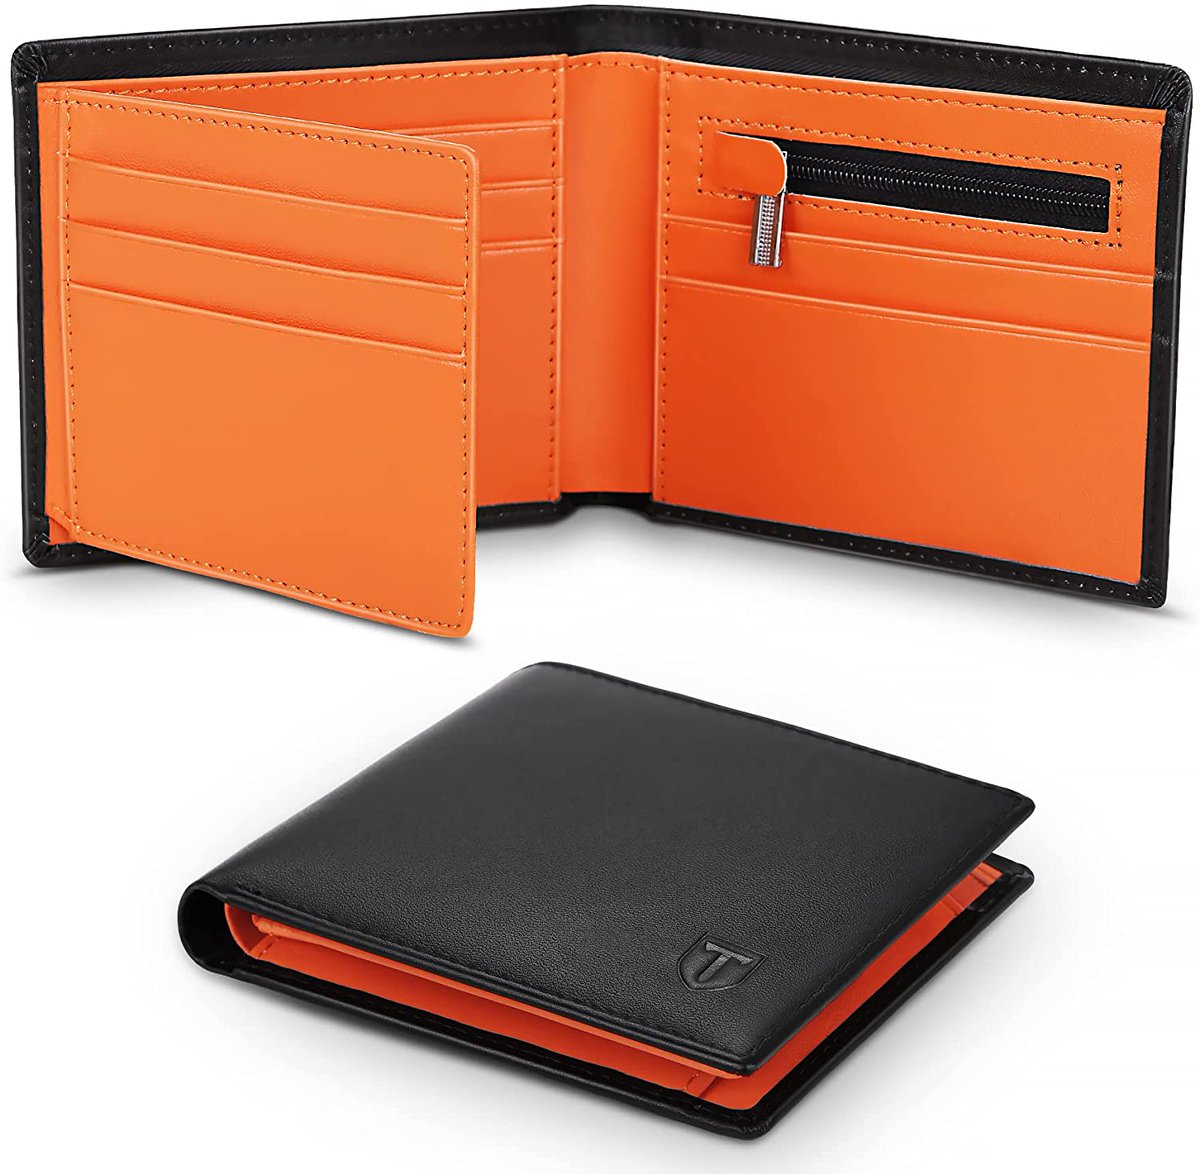 Shop Our GENUINE LEATHER MEN'S SLIM RFID WALLETS Today! #wallets #fashion #accessories #onlineshopping #style #leatherwallets #leathergoods #cardholder #clutch #shopping